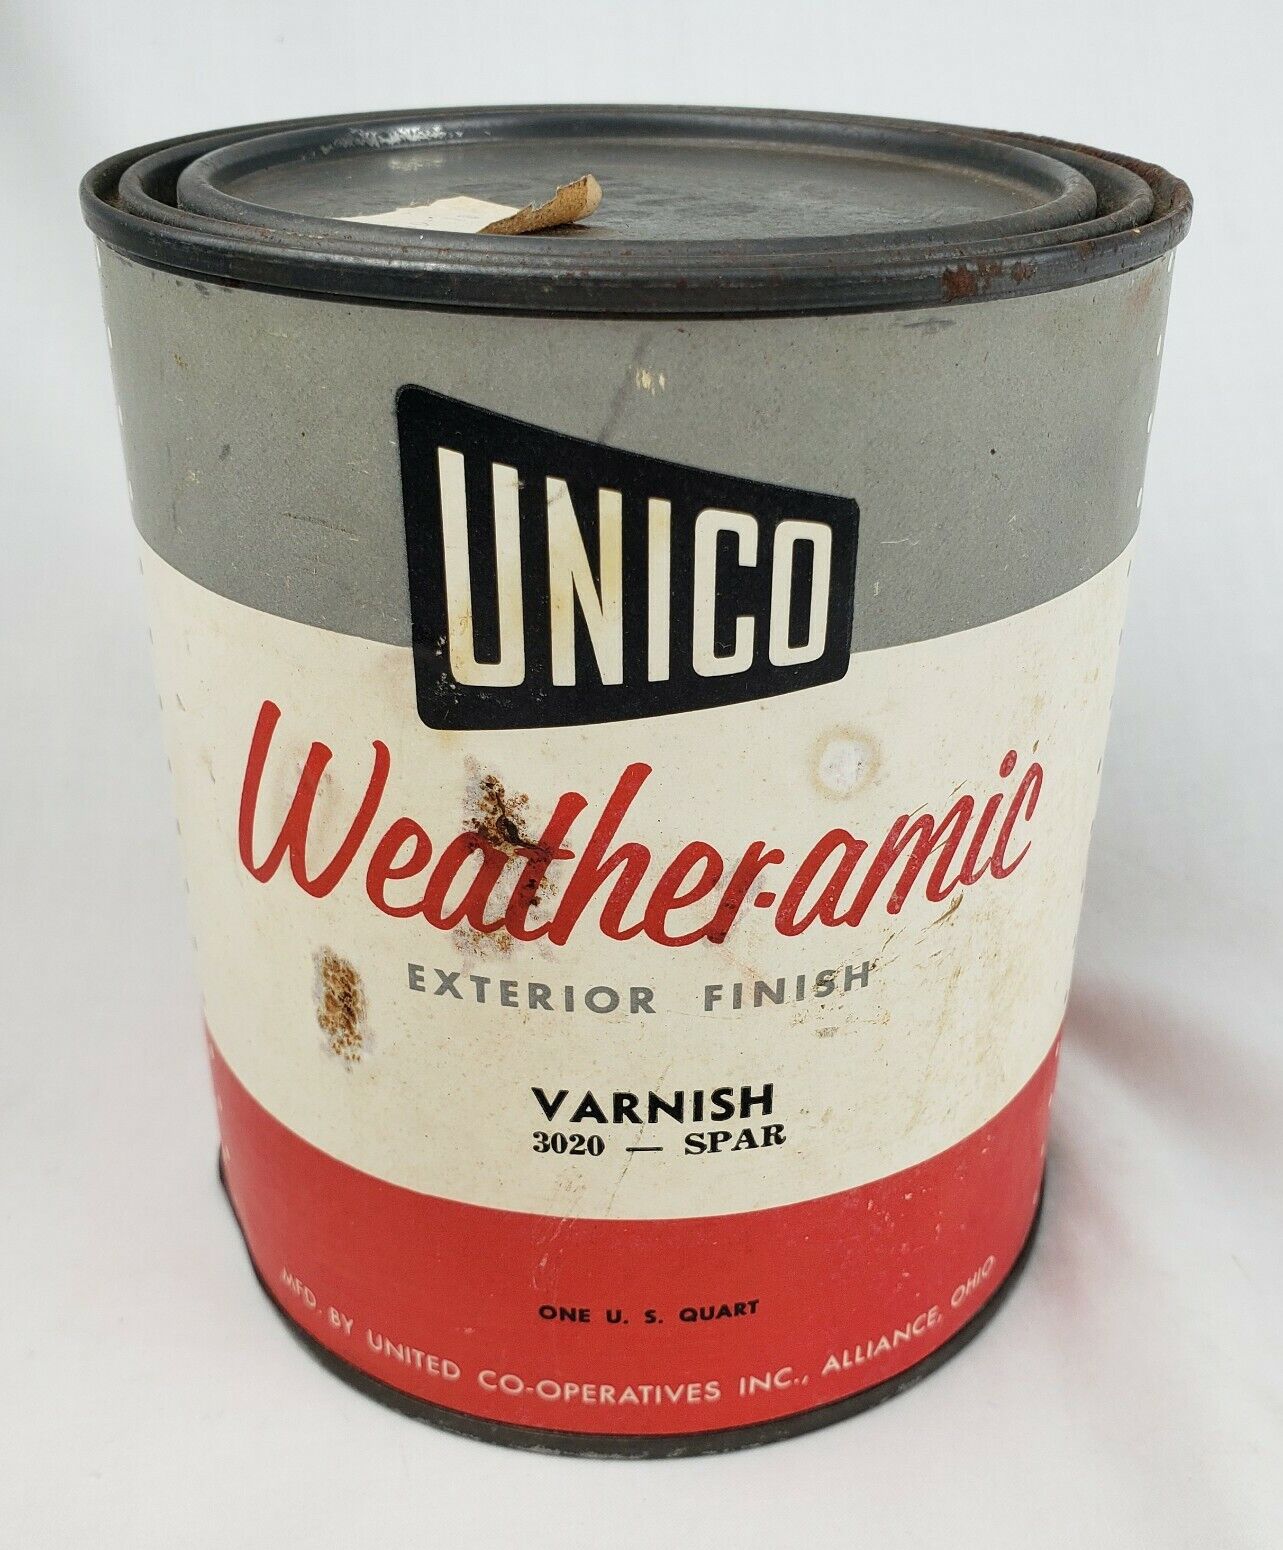 Vintage UNICO Weather-Amic Paint Varnish Can Advertising Sign Gas Oil Quart Tin